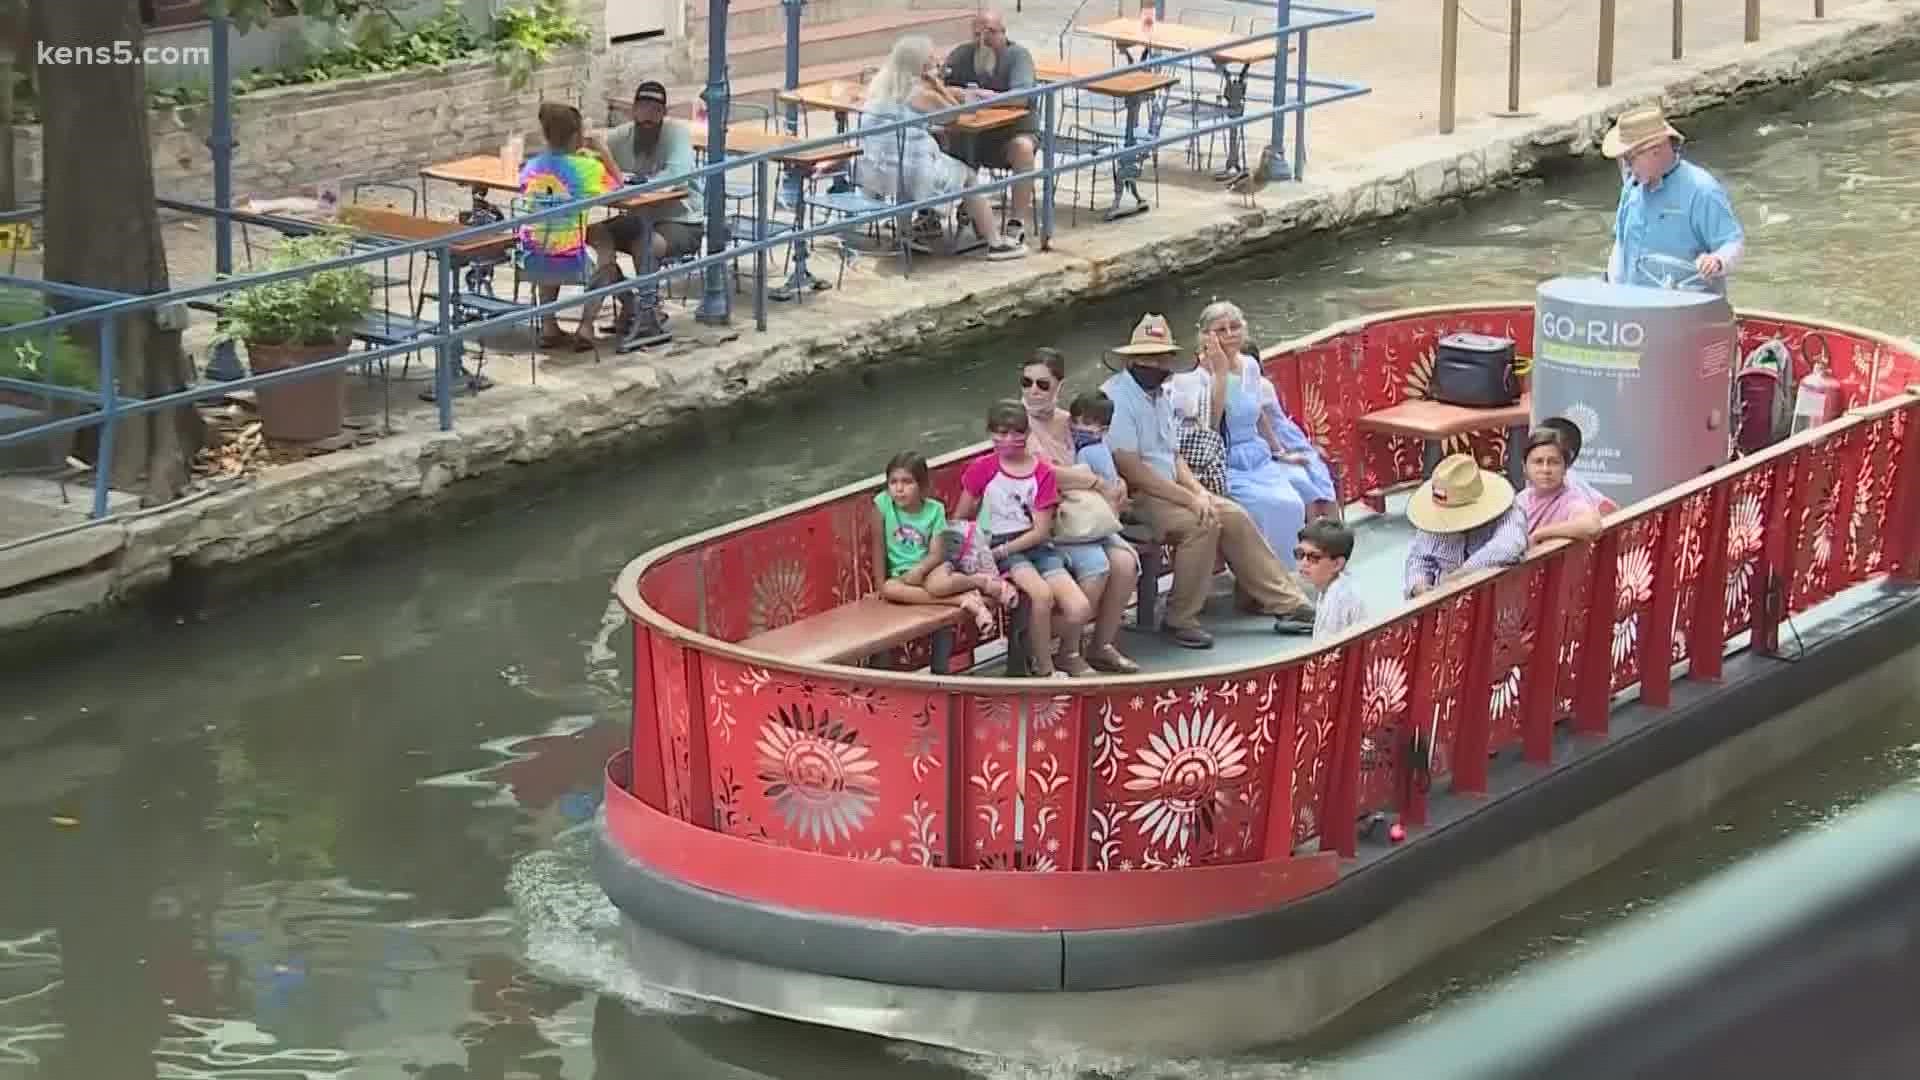 Vacation, baecation or staycation, they can all be here in San Antonio. Here are some cool things to explore in the Alamo City.